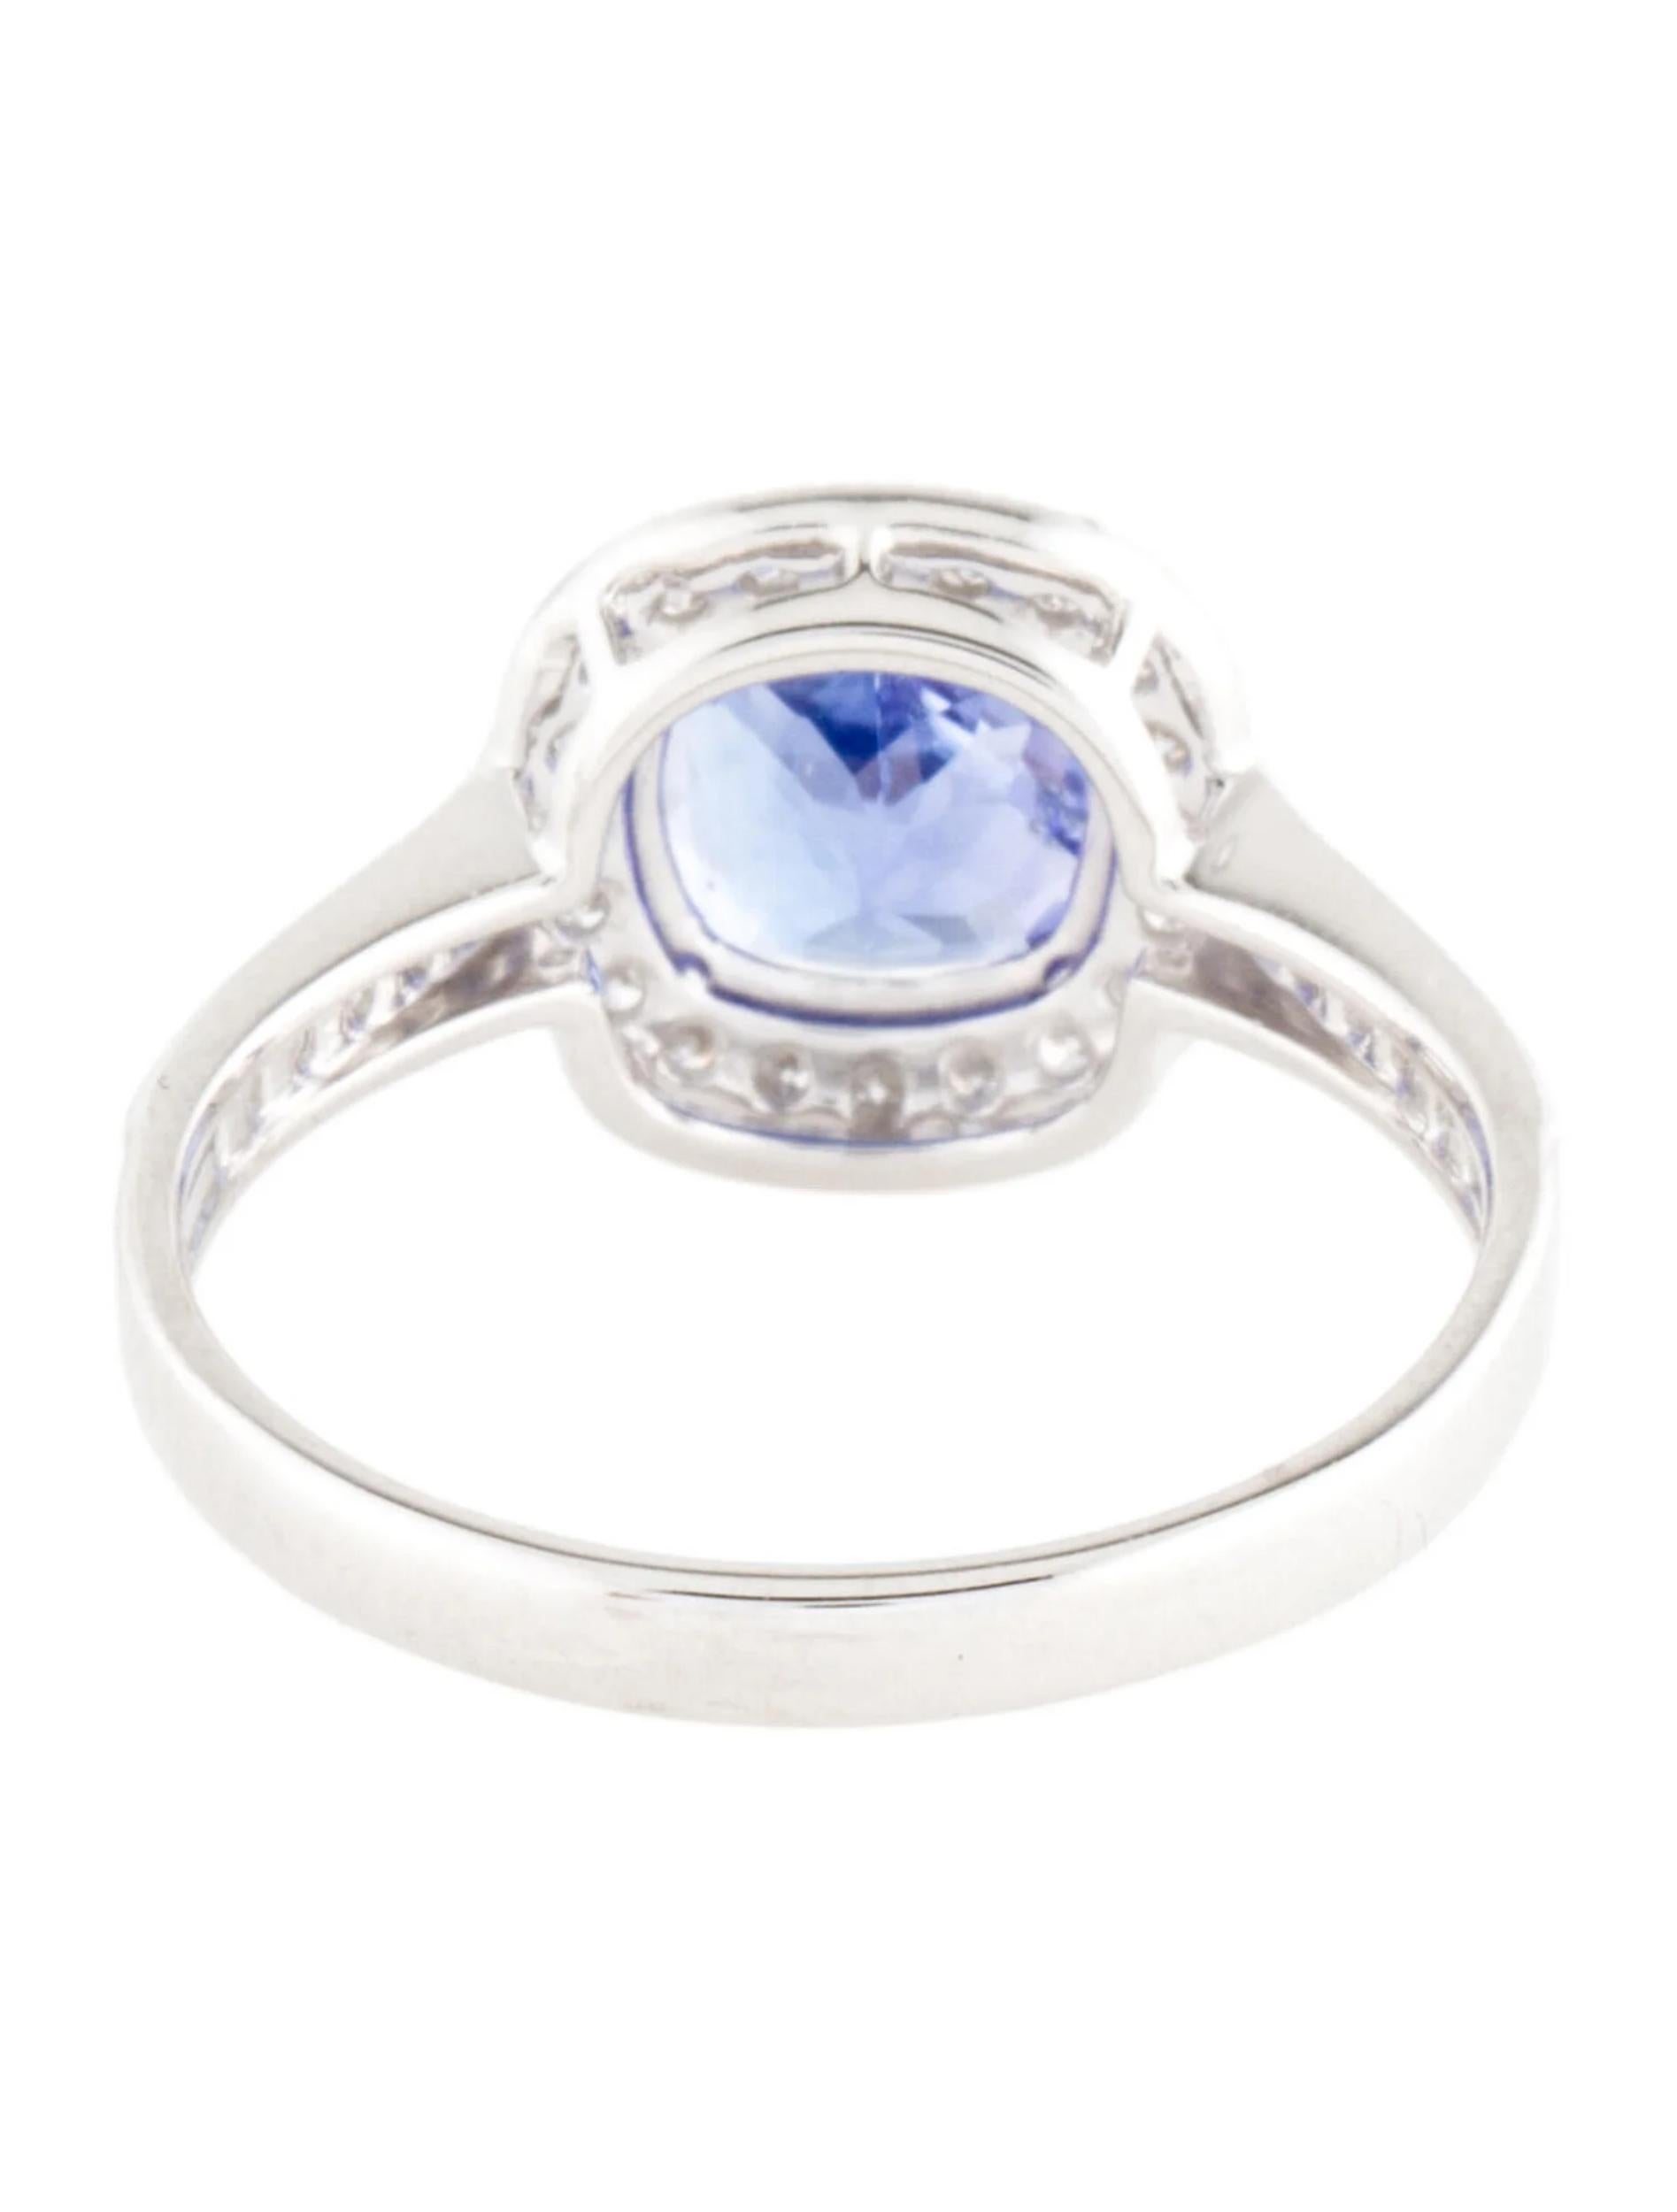 Luxurious 14K 1.80ct Tanzanite & Diamond Cocktail Ring, Size 6.75 - Elegant In New Condition For Sale In Holtsville, NY